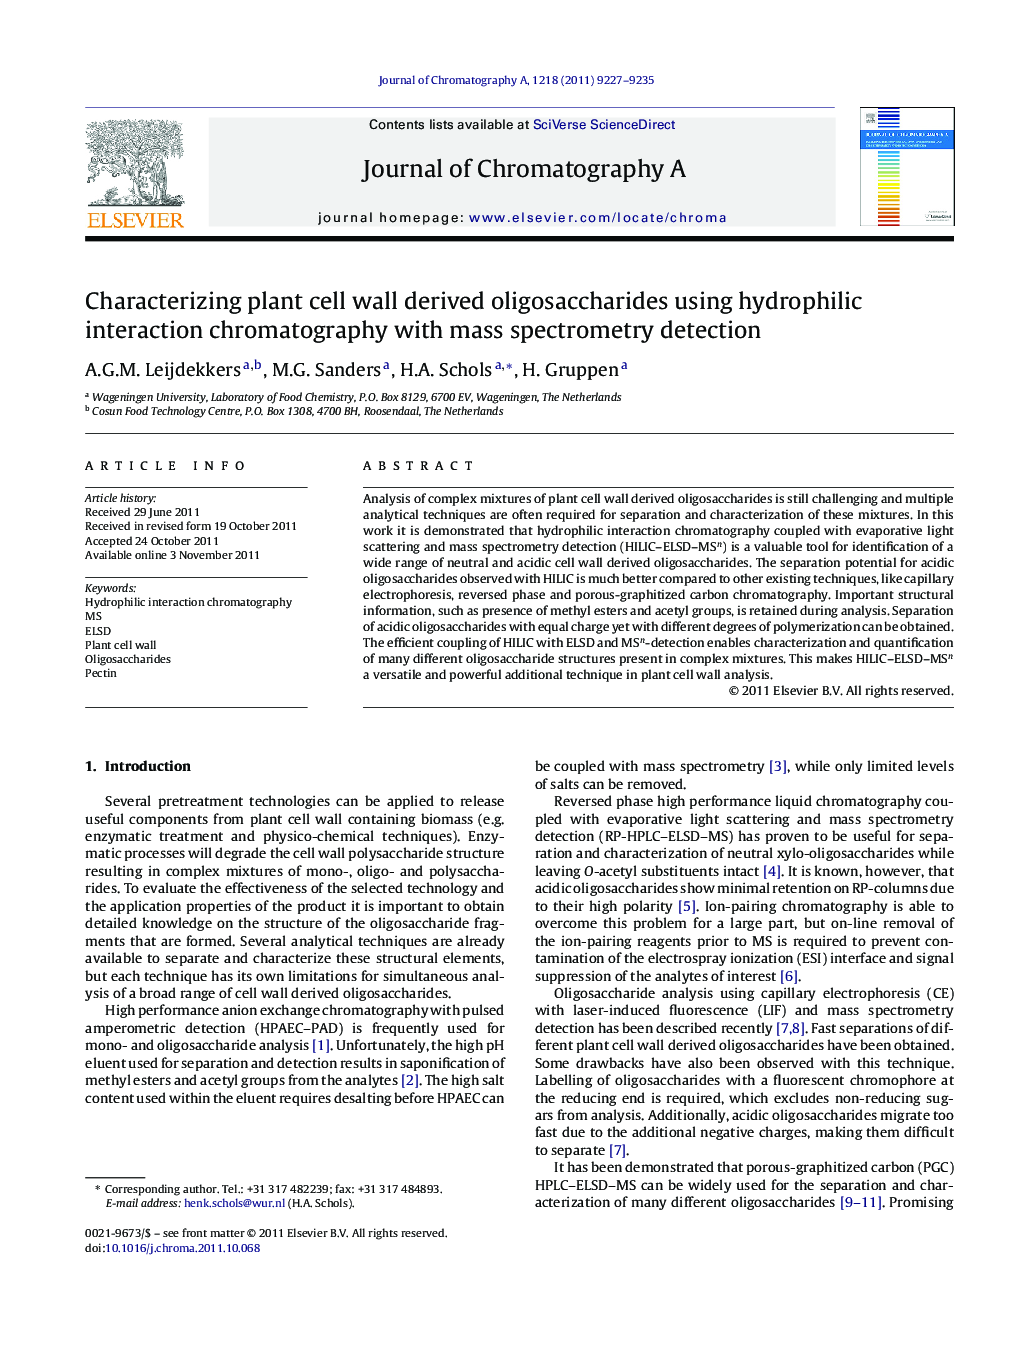 Characterizing plant cell wall derived oligosaccharides using hydrophilic interaction chromatography with mass spectrometry detection